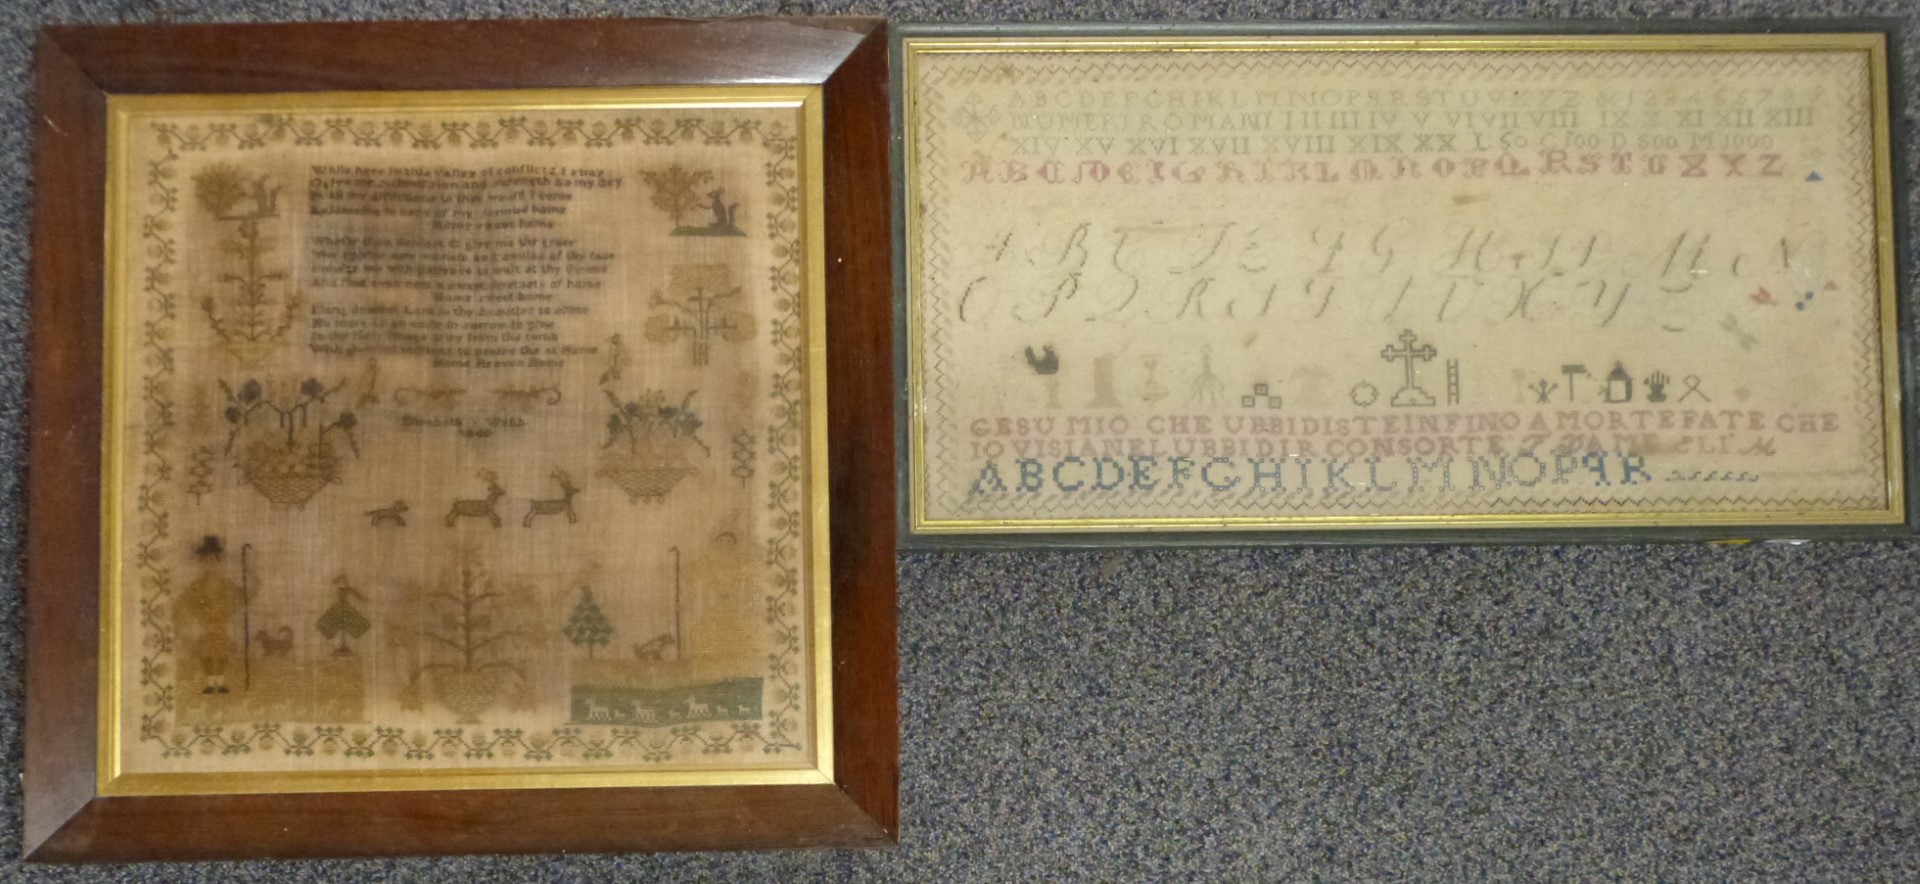 Two Victorian embroidery samplers, one Elizabeth Webb, 1846, largest 39 x 37cm